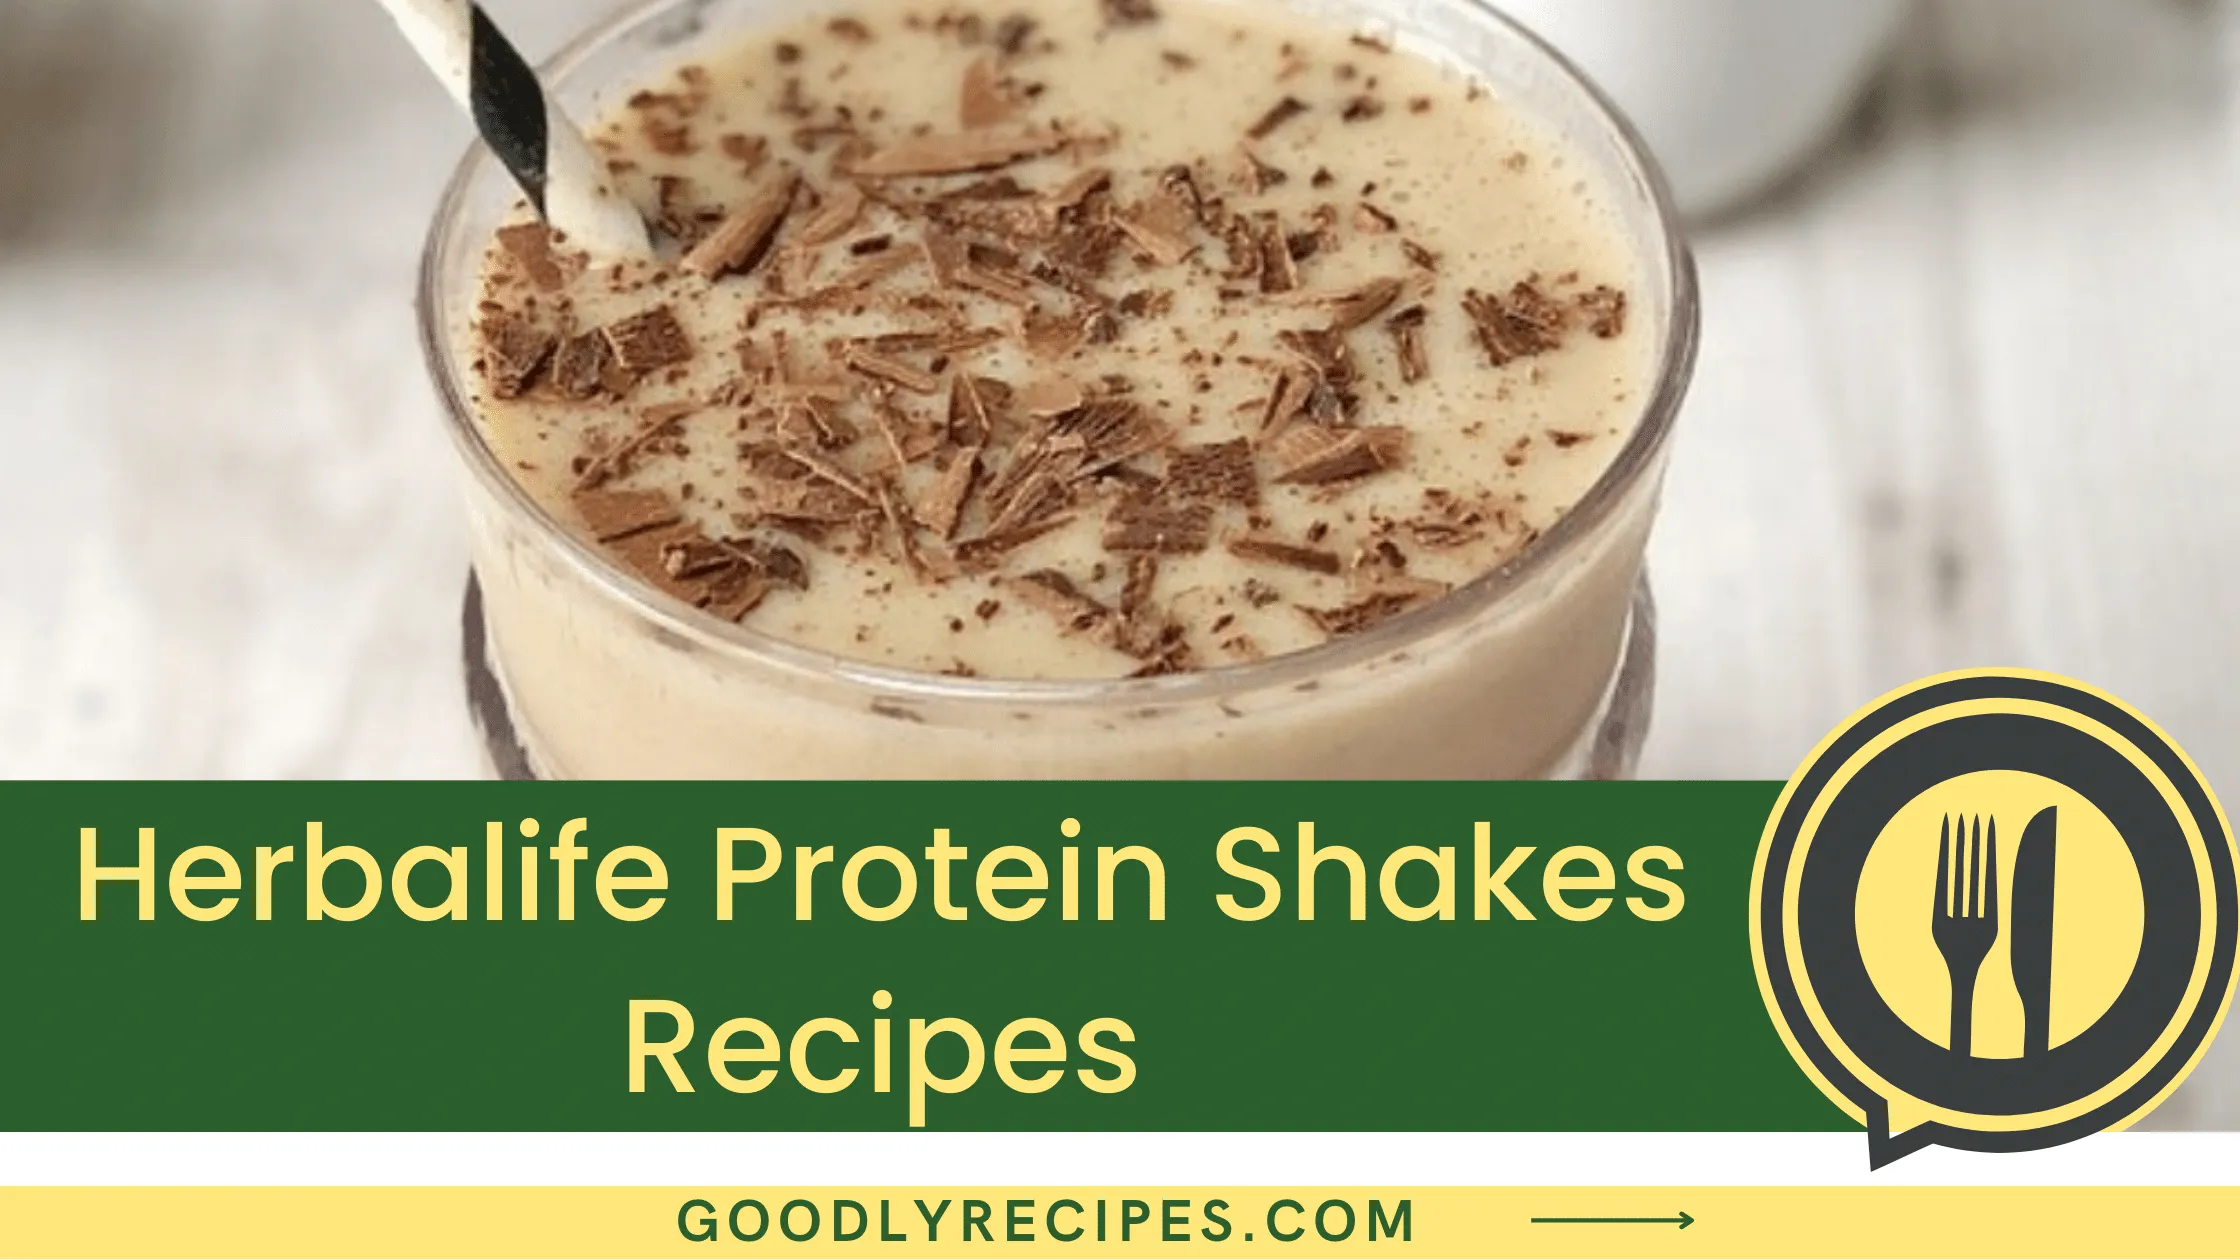 Herbalife Protein Shakes Recipe - For Food Lovers